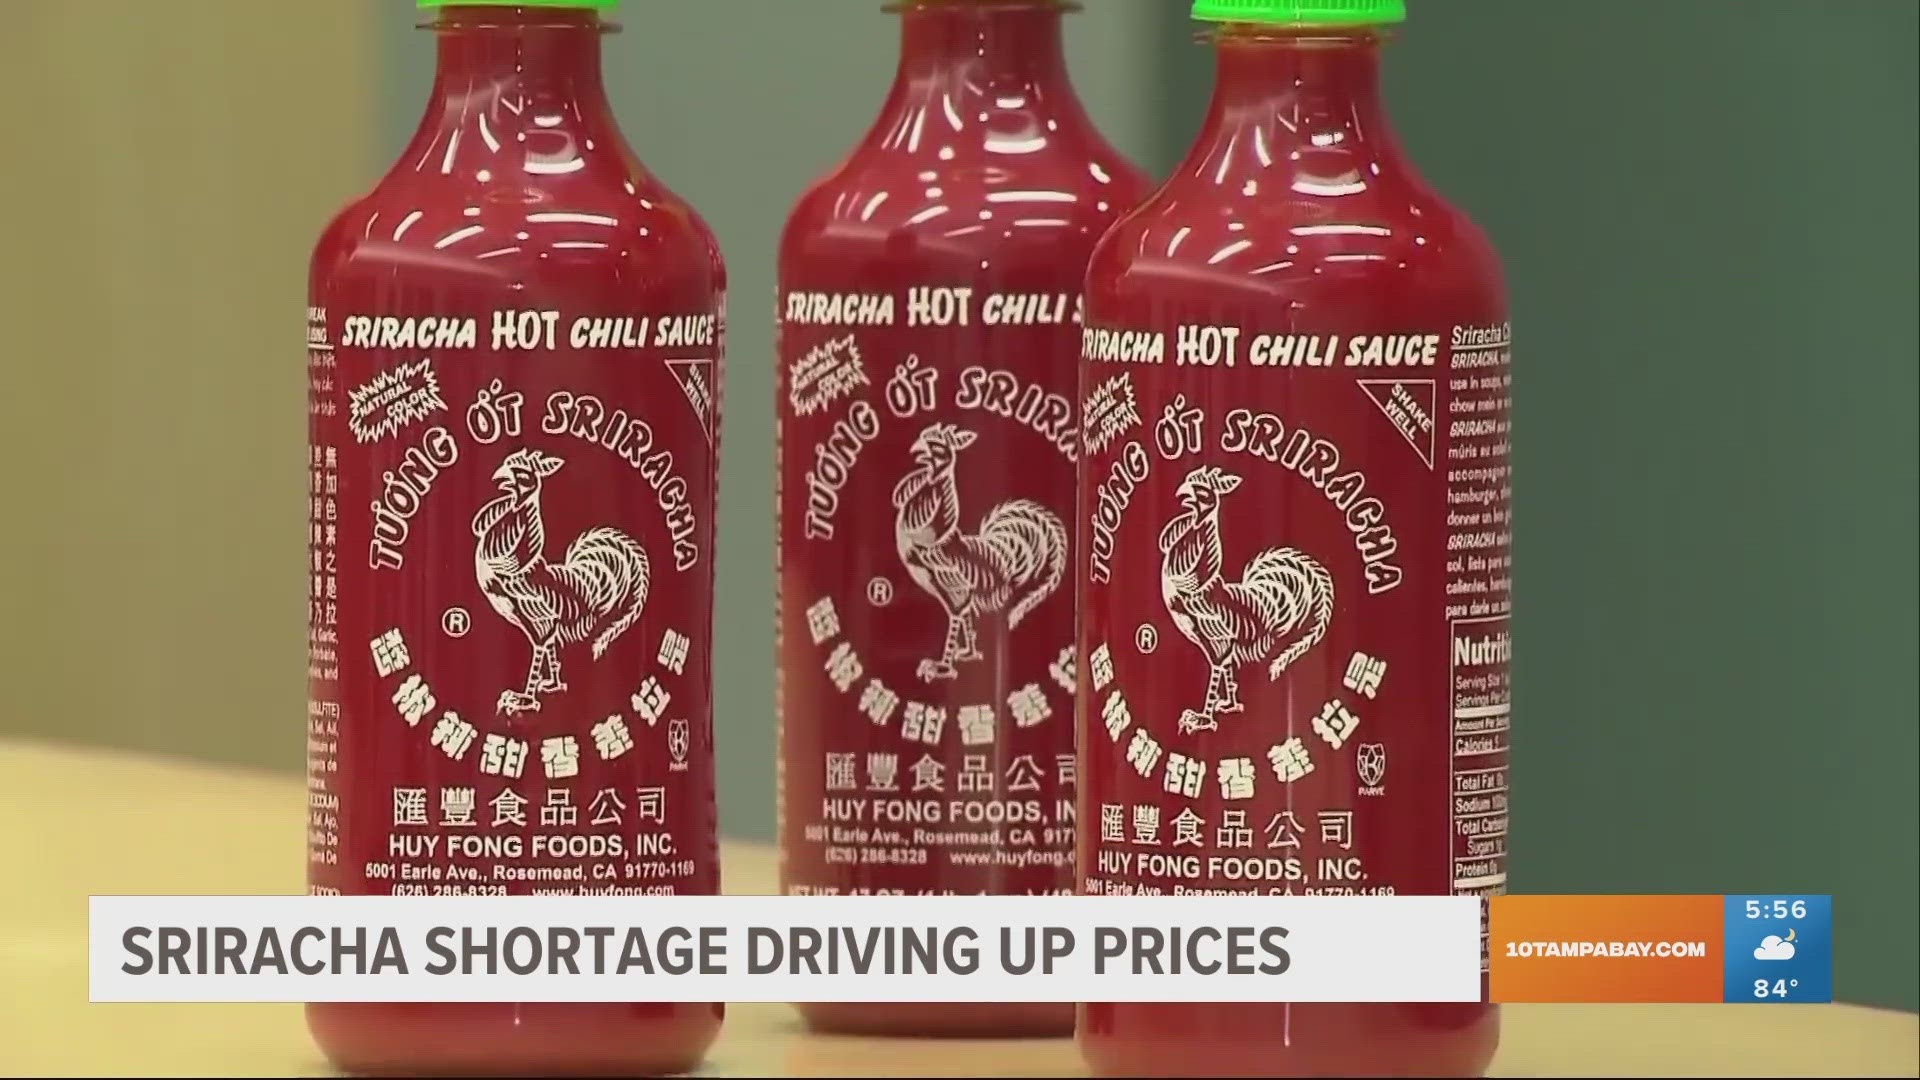 With a shortage of the spicy Asian condiment, now bottles of Sriracha are for sale in Tampa Bay, for a steep price.